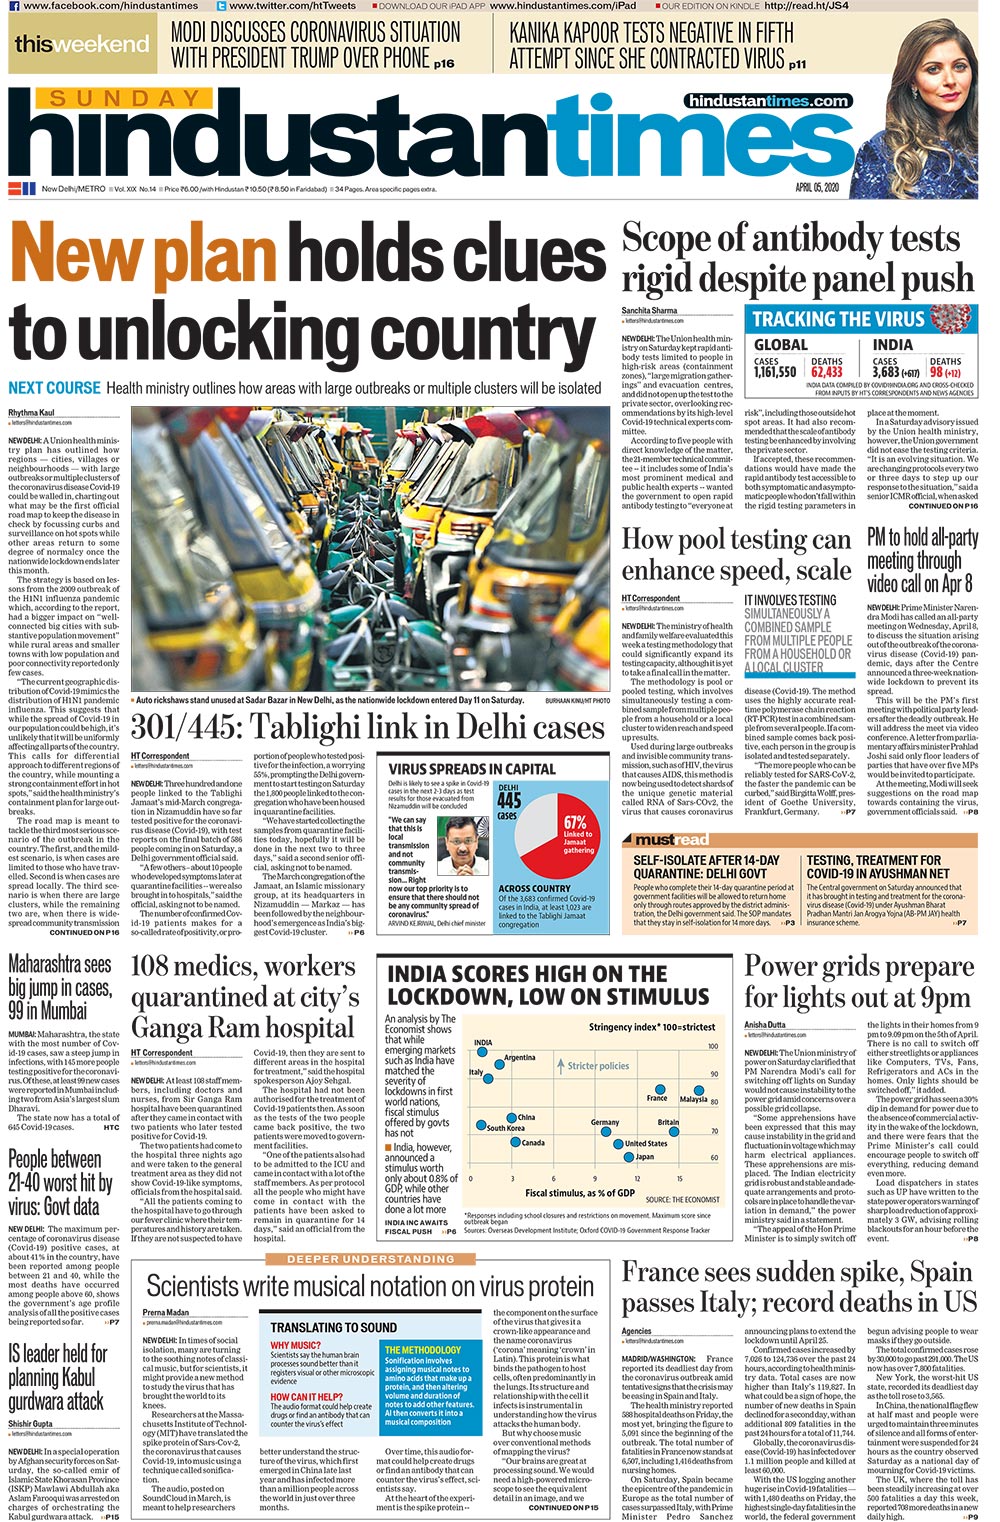 Coronavirus Lockdown, Plight Of Migrant Labourers And Other Top Stories On Sunday